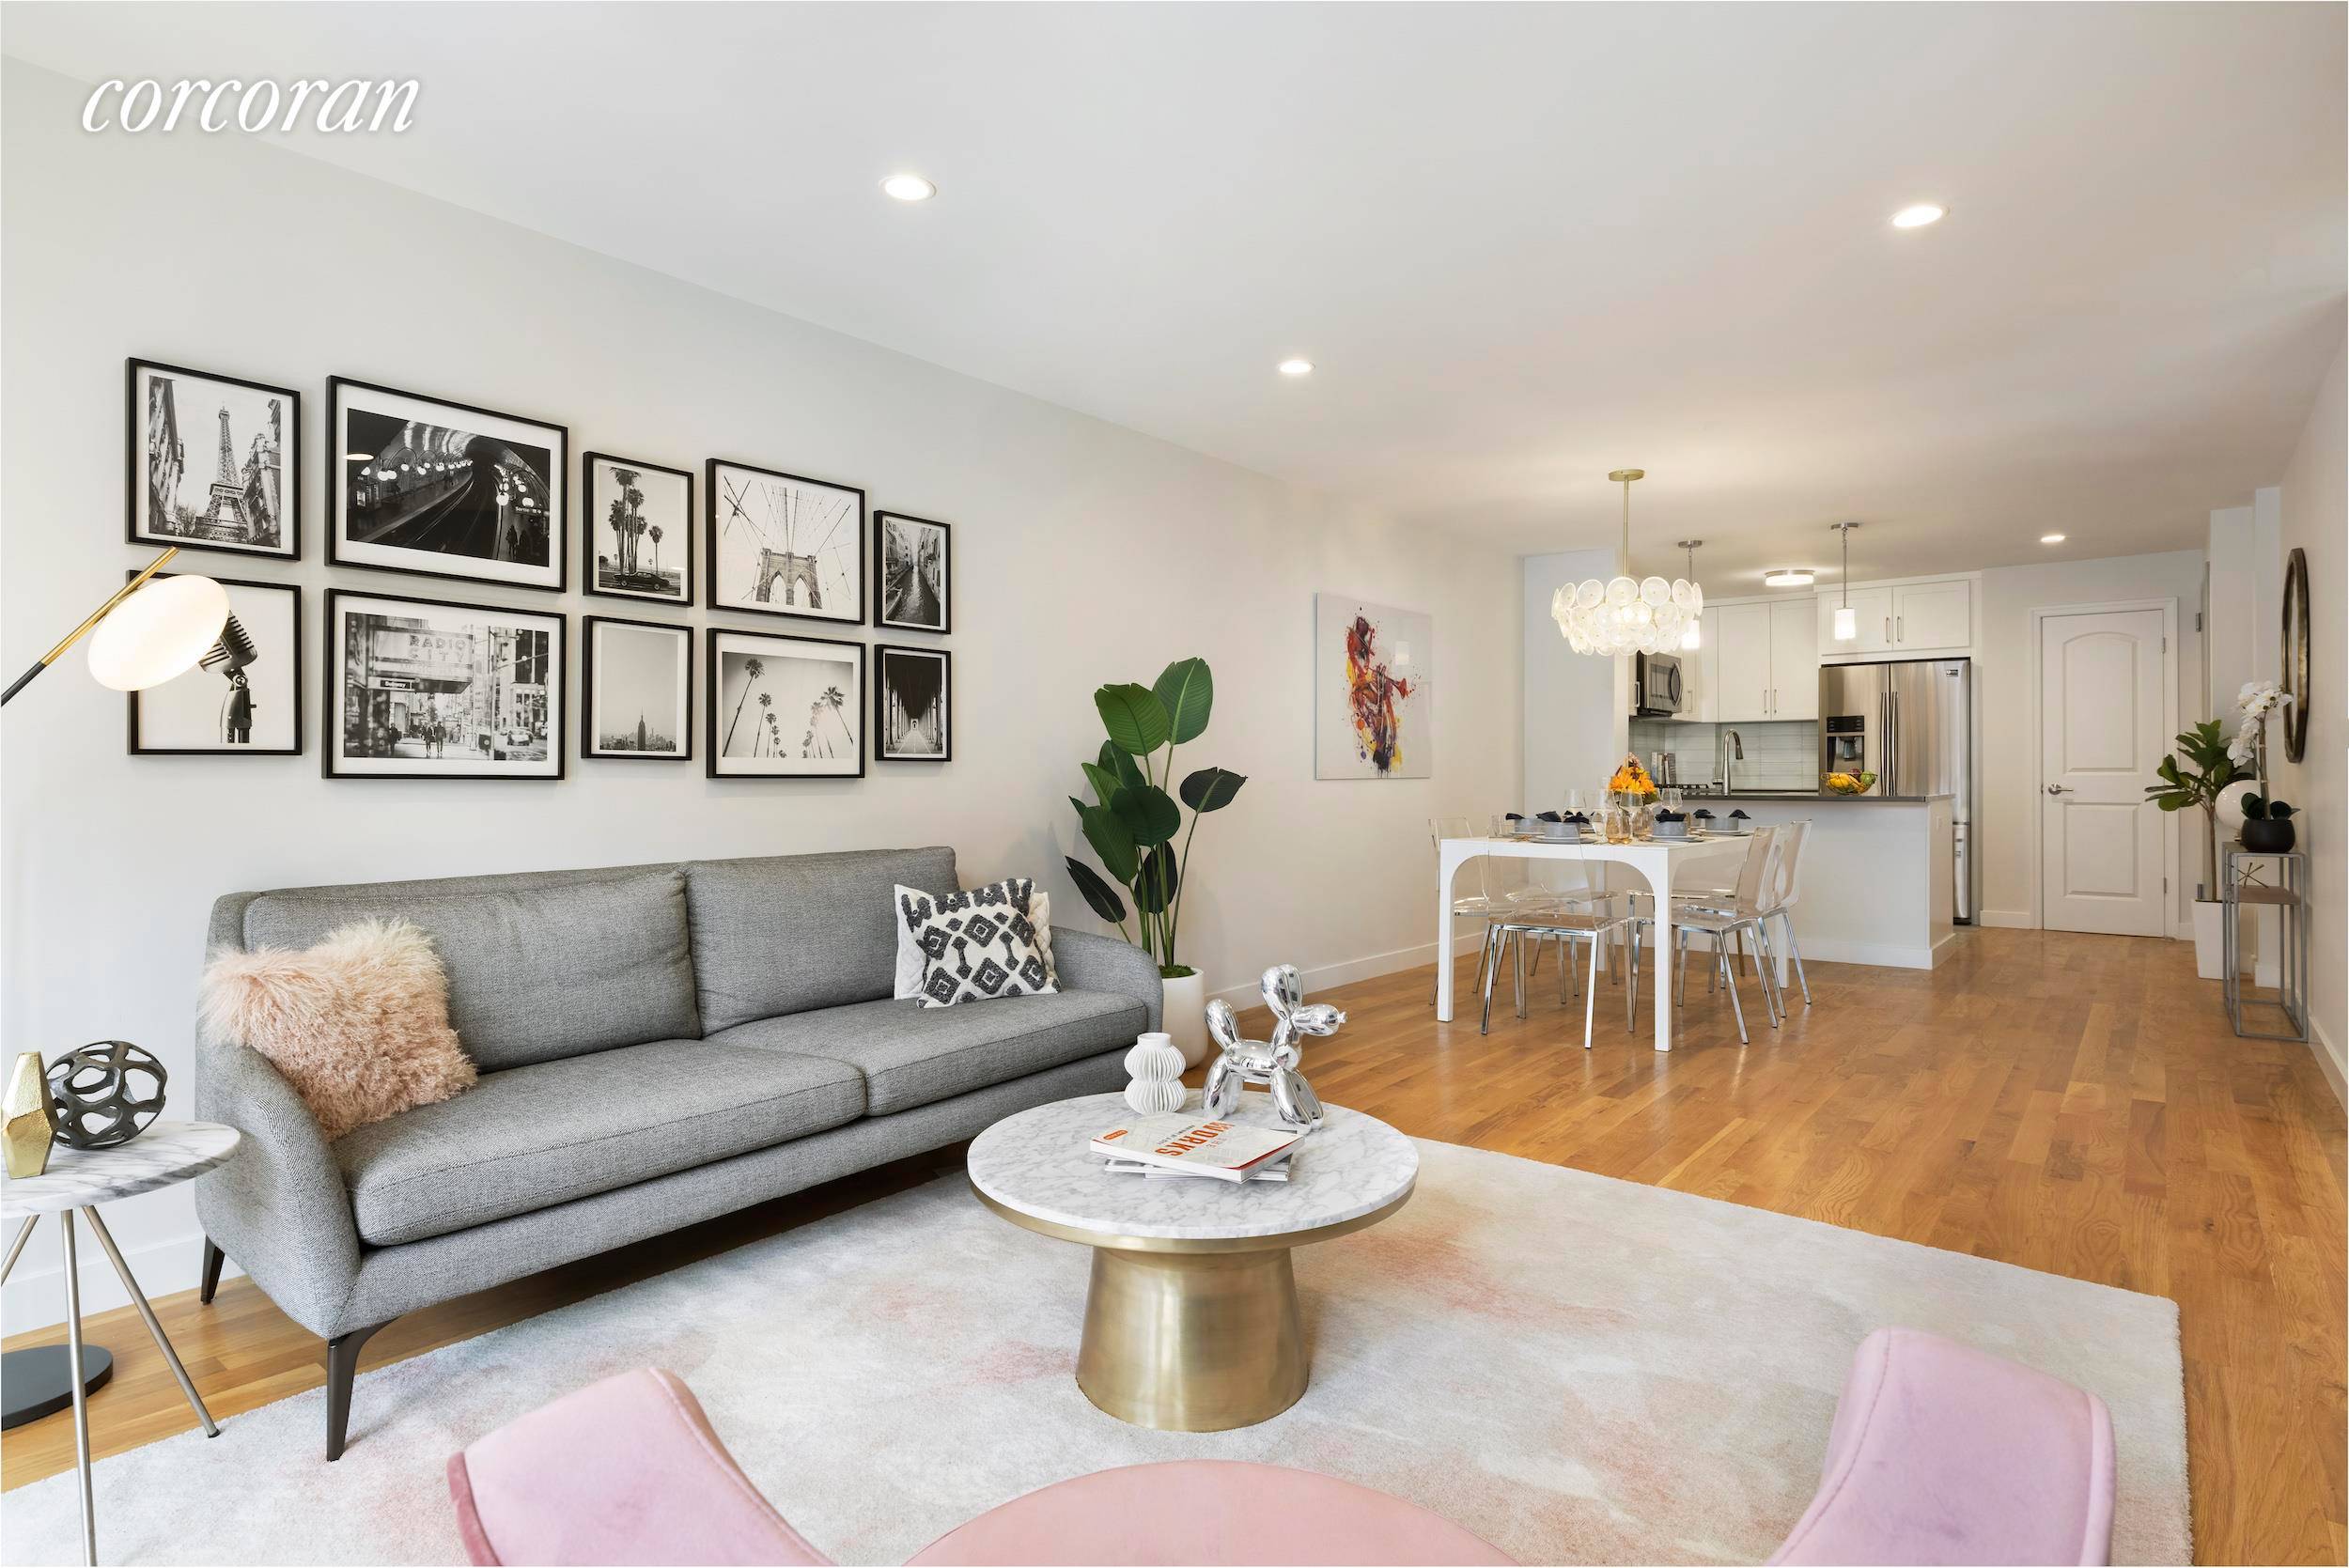 Located in the heart of the culturally rich, close knit community of Astoria, Queens.